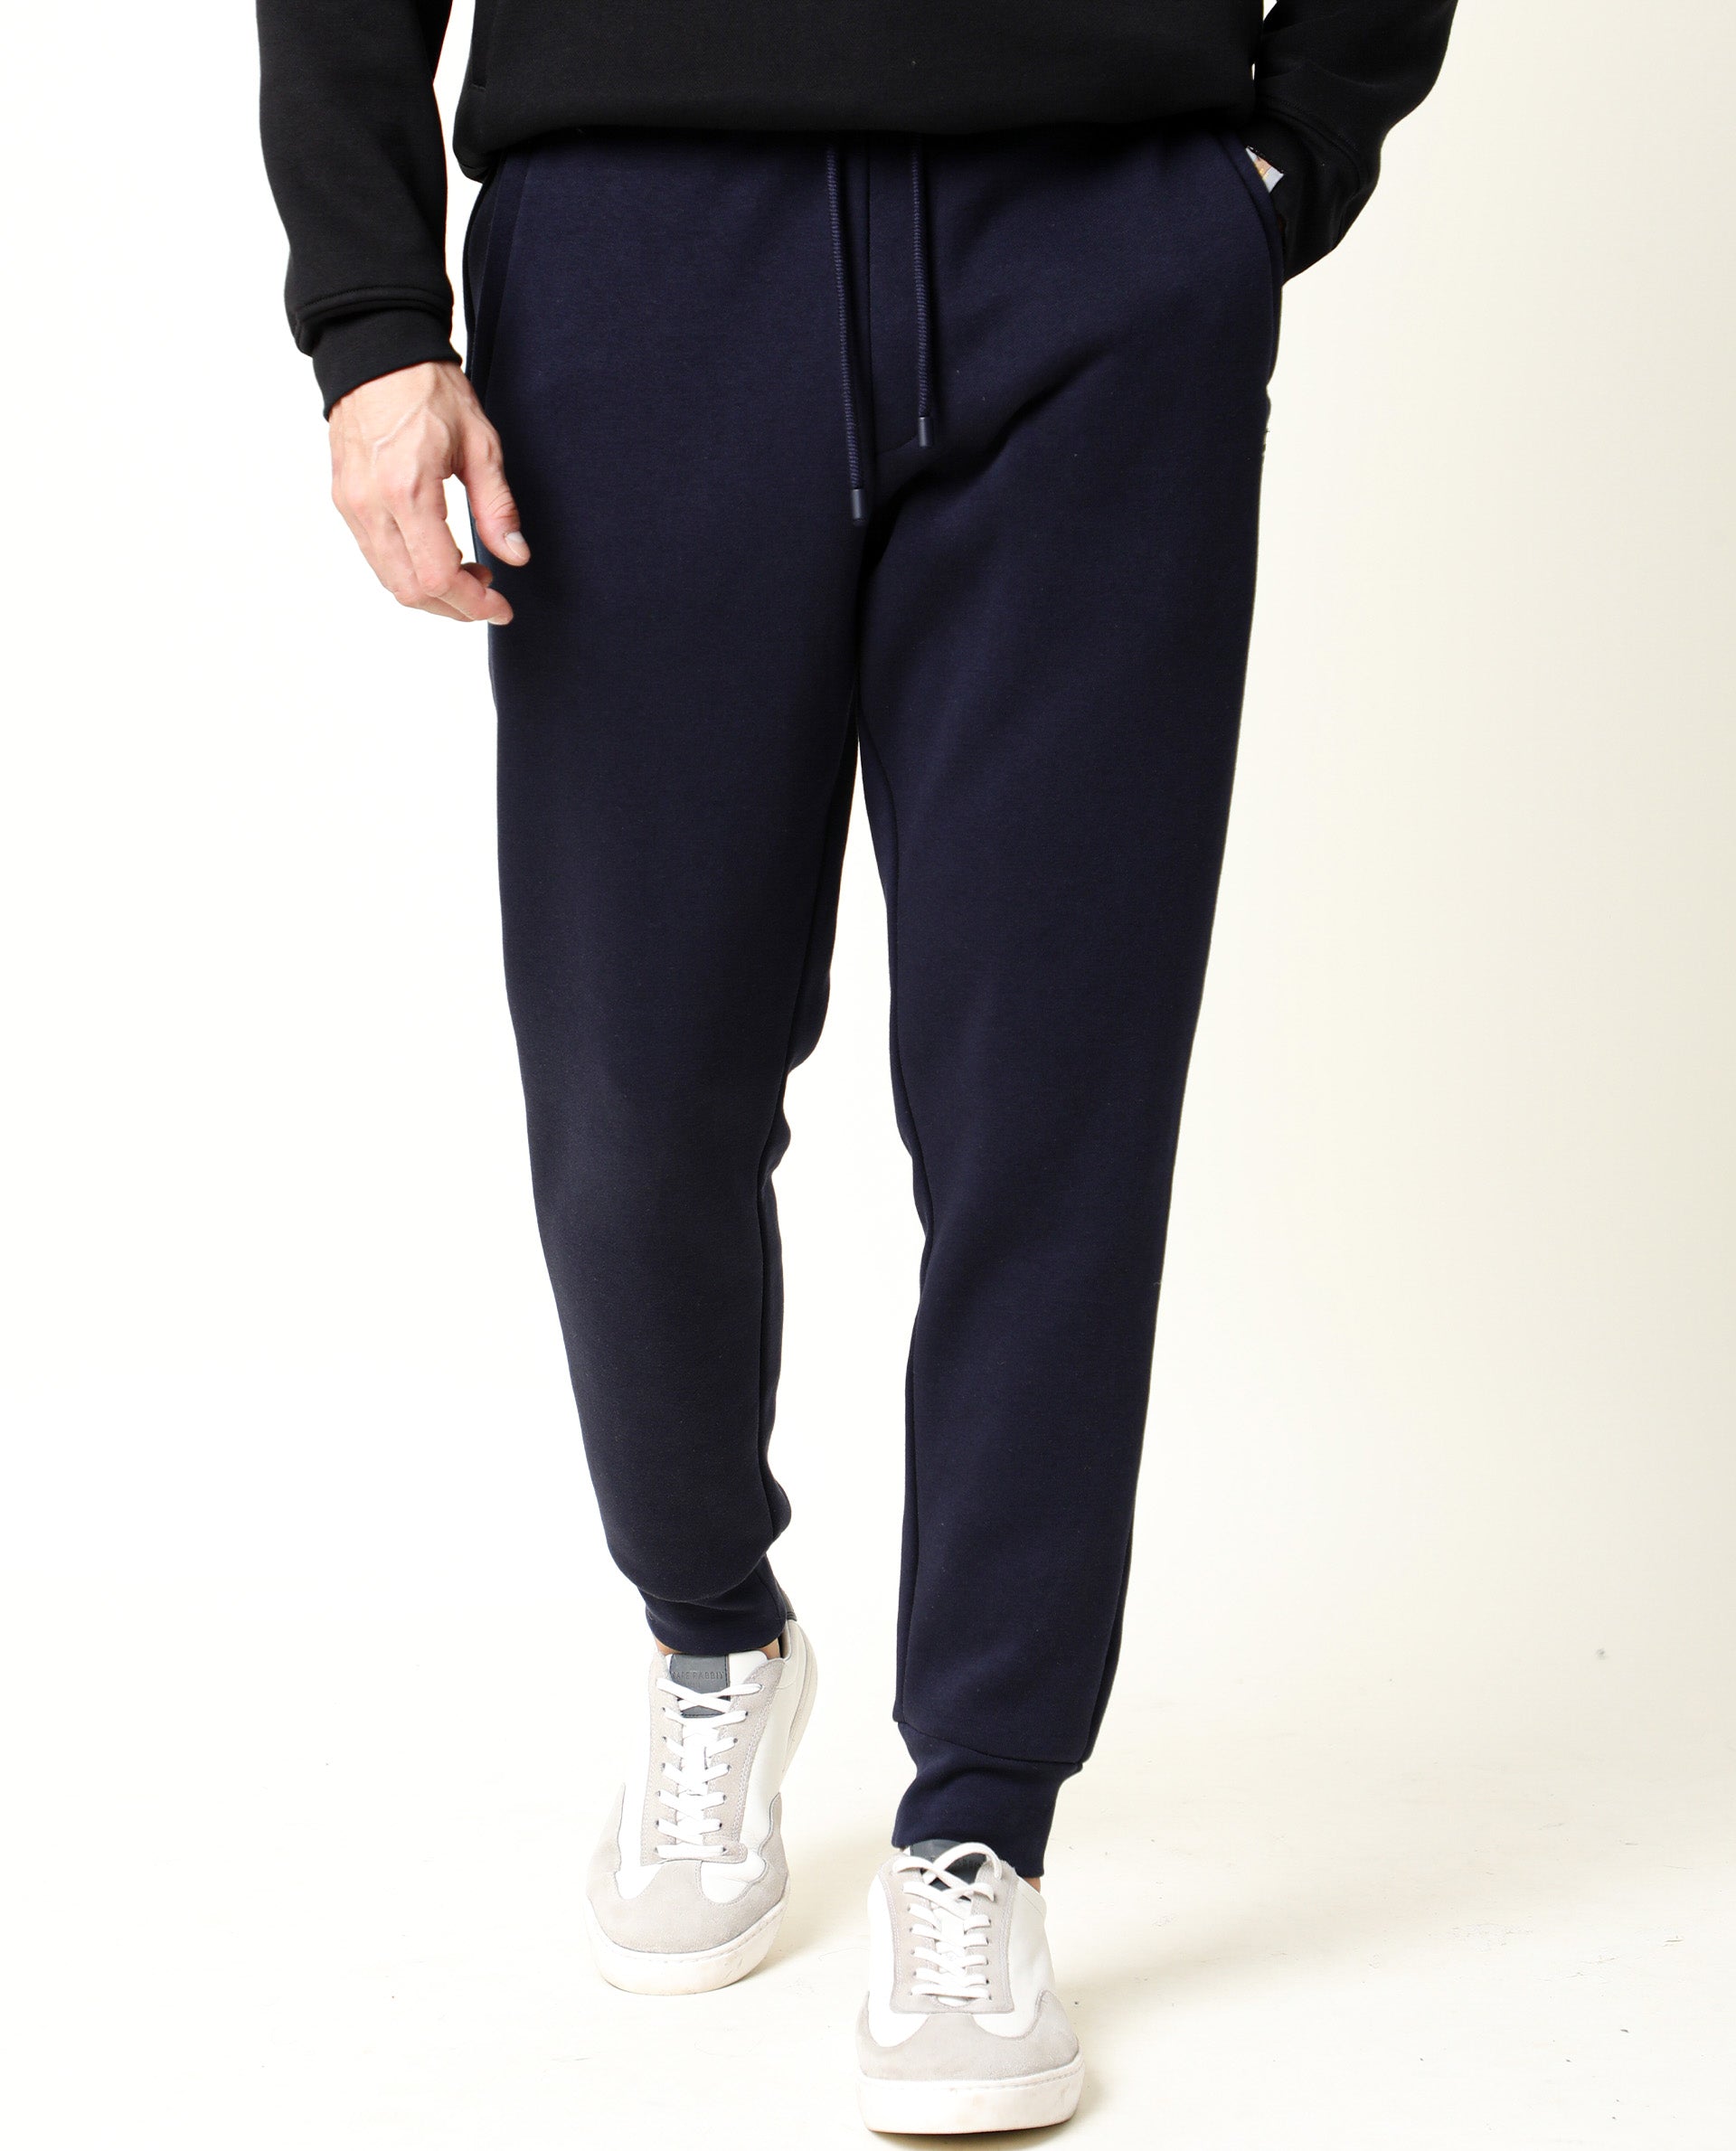 Omtex Trackpants  Buy Omtex Polyester Royal Track Pants 12 For Sports And  Gym For Men Black Online  Nykaa Fashion